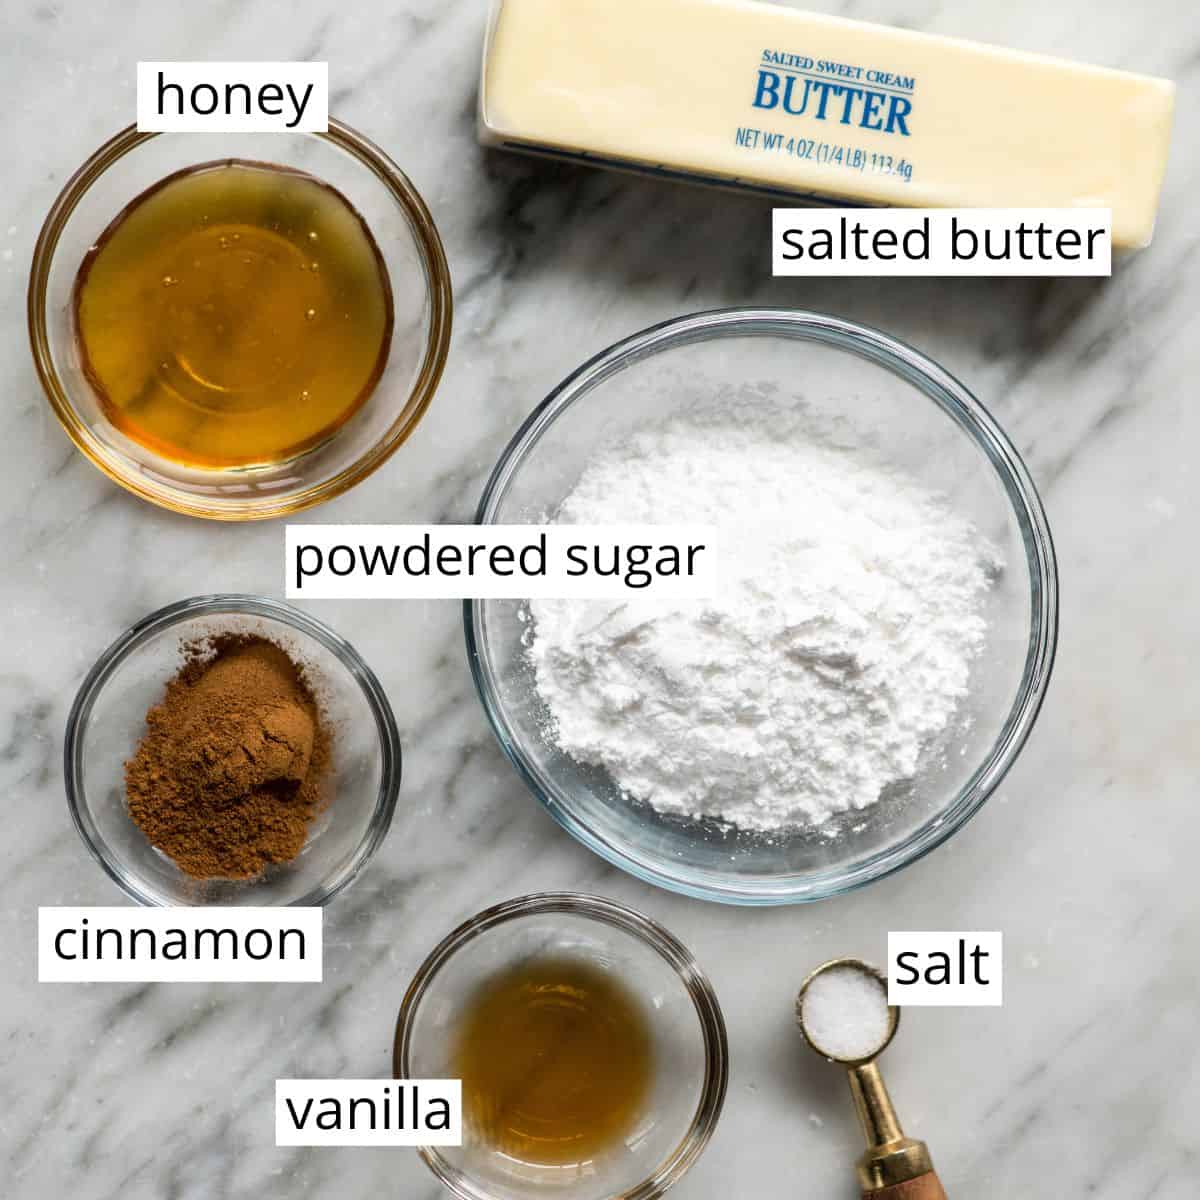 overhead view of the labeled ingredients in this cinnamon honey butter recipe